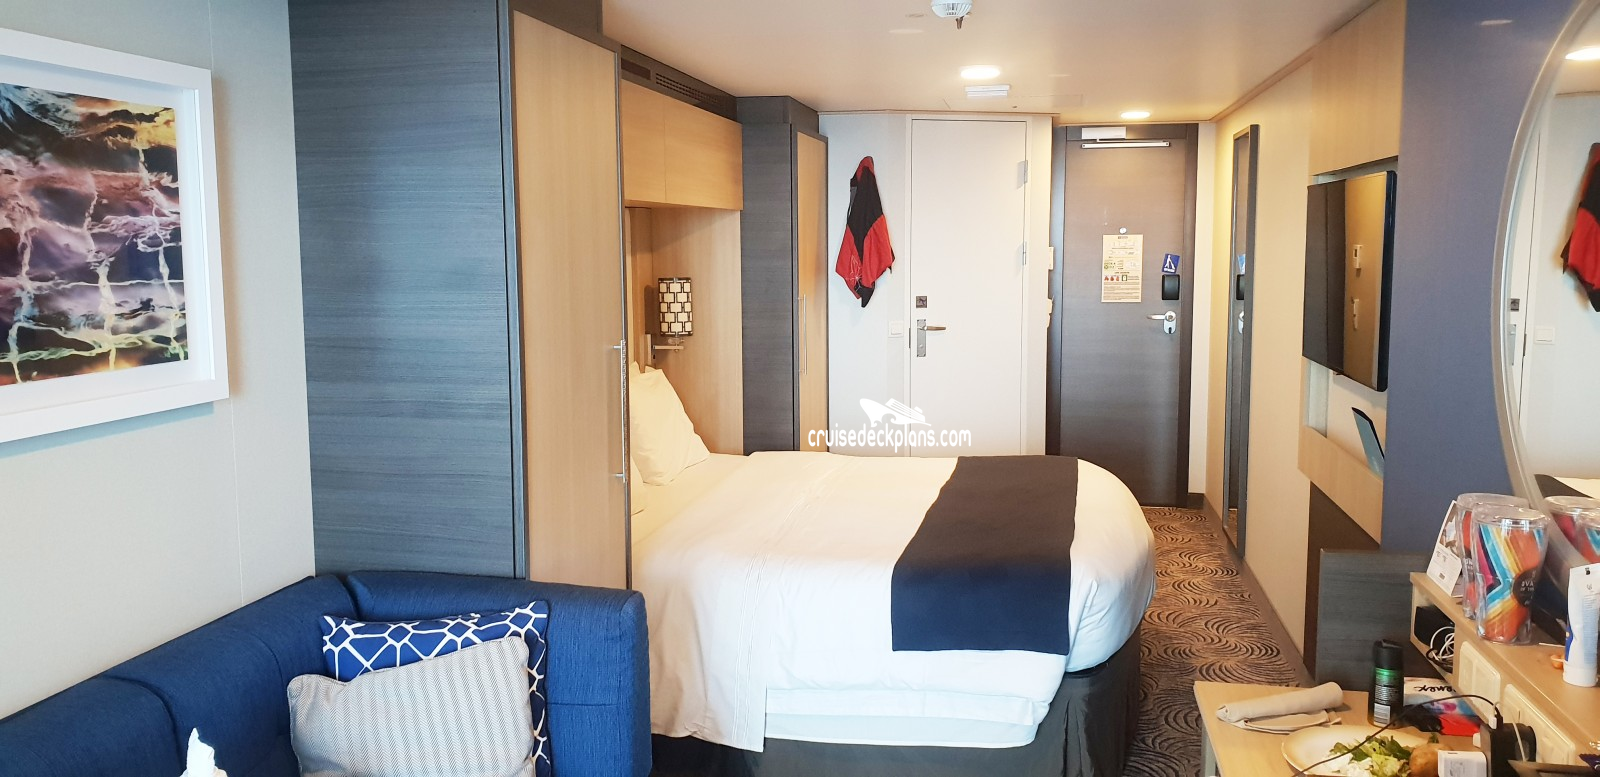 Ovation of the Seas Cabin 9246 - Category 2C - Ocean View Stateroom with  Large Balcony 9246 on